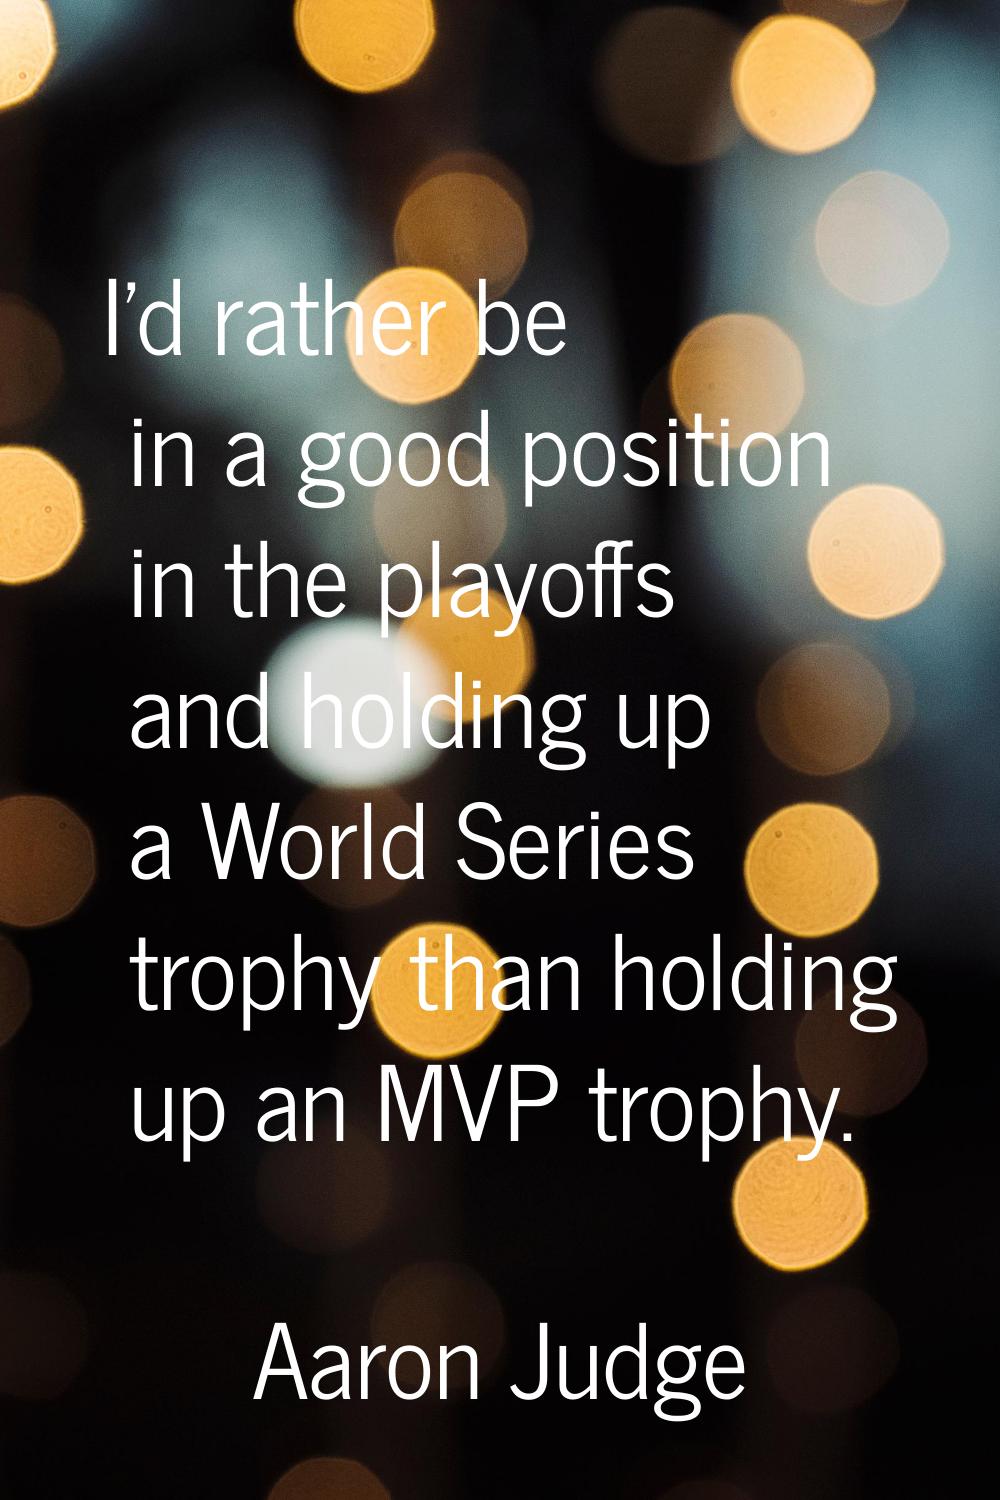 I'd rather be in a good position in the playoffs and holding up a World Series trophy than holding 